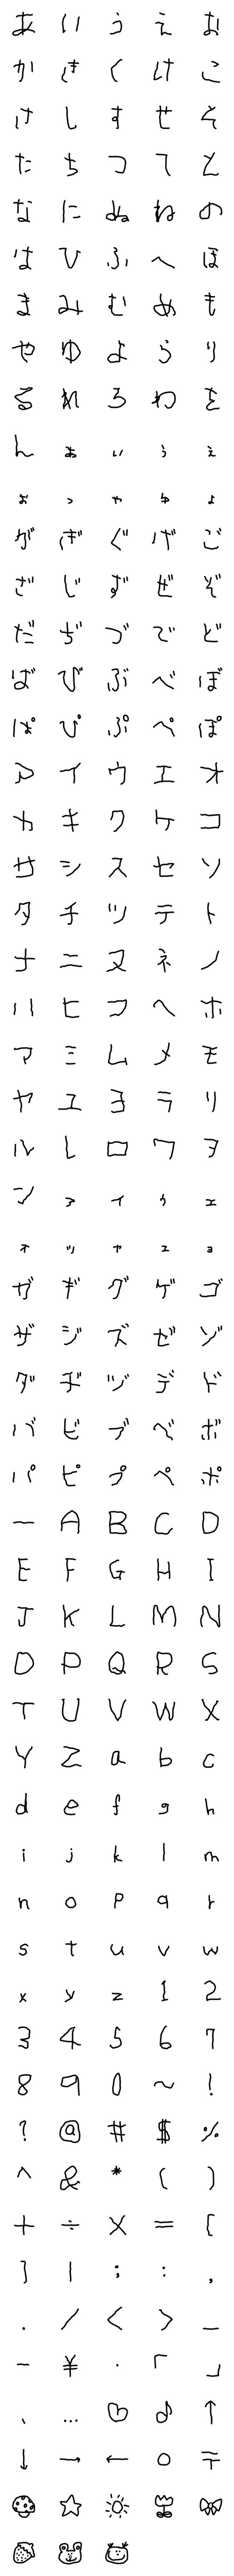 [LINE絵文字]こども可愛い☆モノクロ絵文字(デコ文字)の画像一覧